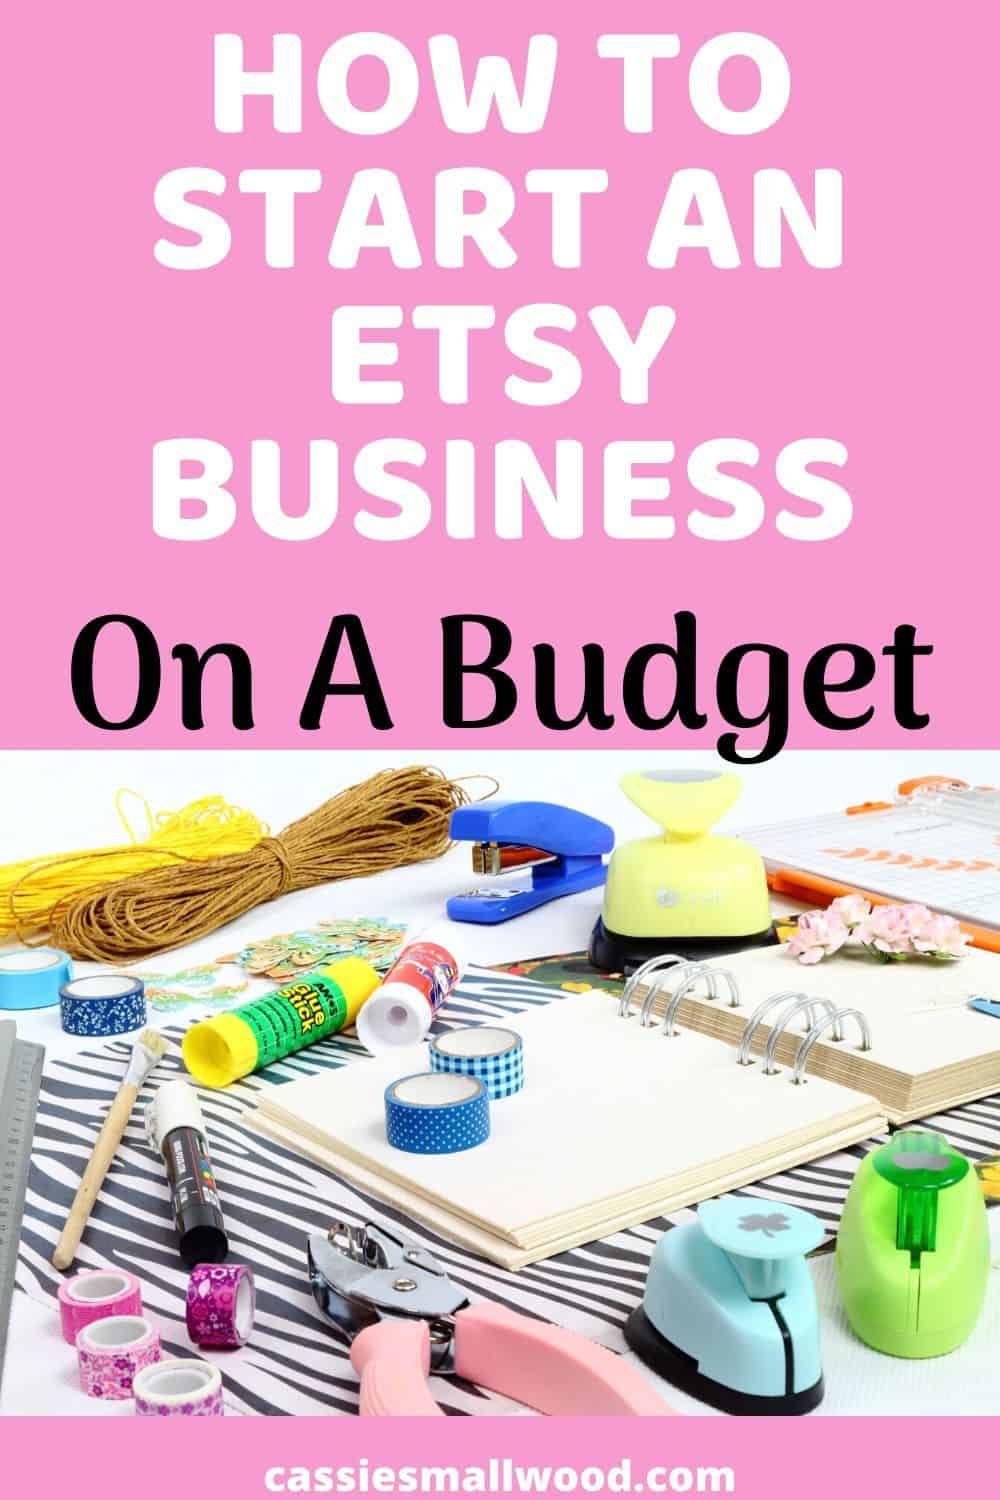 Tips and ideas for how to start an Etsy shop on a budget under $100. What items to make and sell with low material costs, pricing your items to make money and how to open an inexpensive small business so you can make extra cash from home. Easy DIY ways to save money on marketing, shipping and packaging in your craft business. #sellingcrafts #sellonetsy